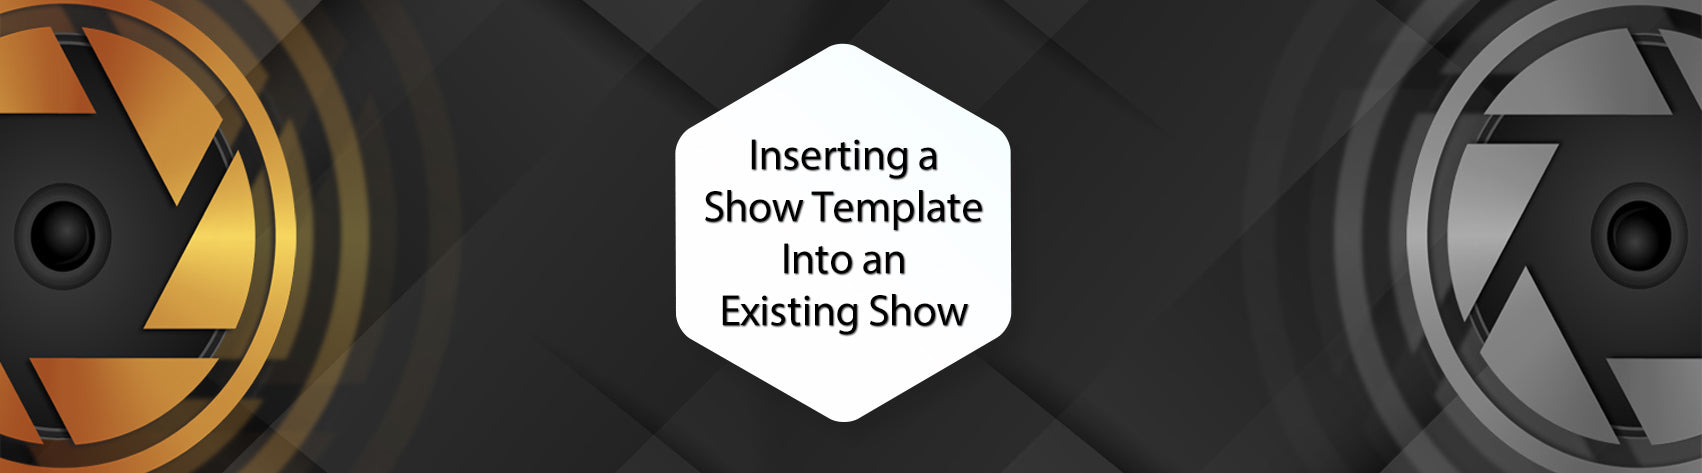 Inserting a Show Template Into an Existing Show